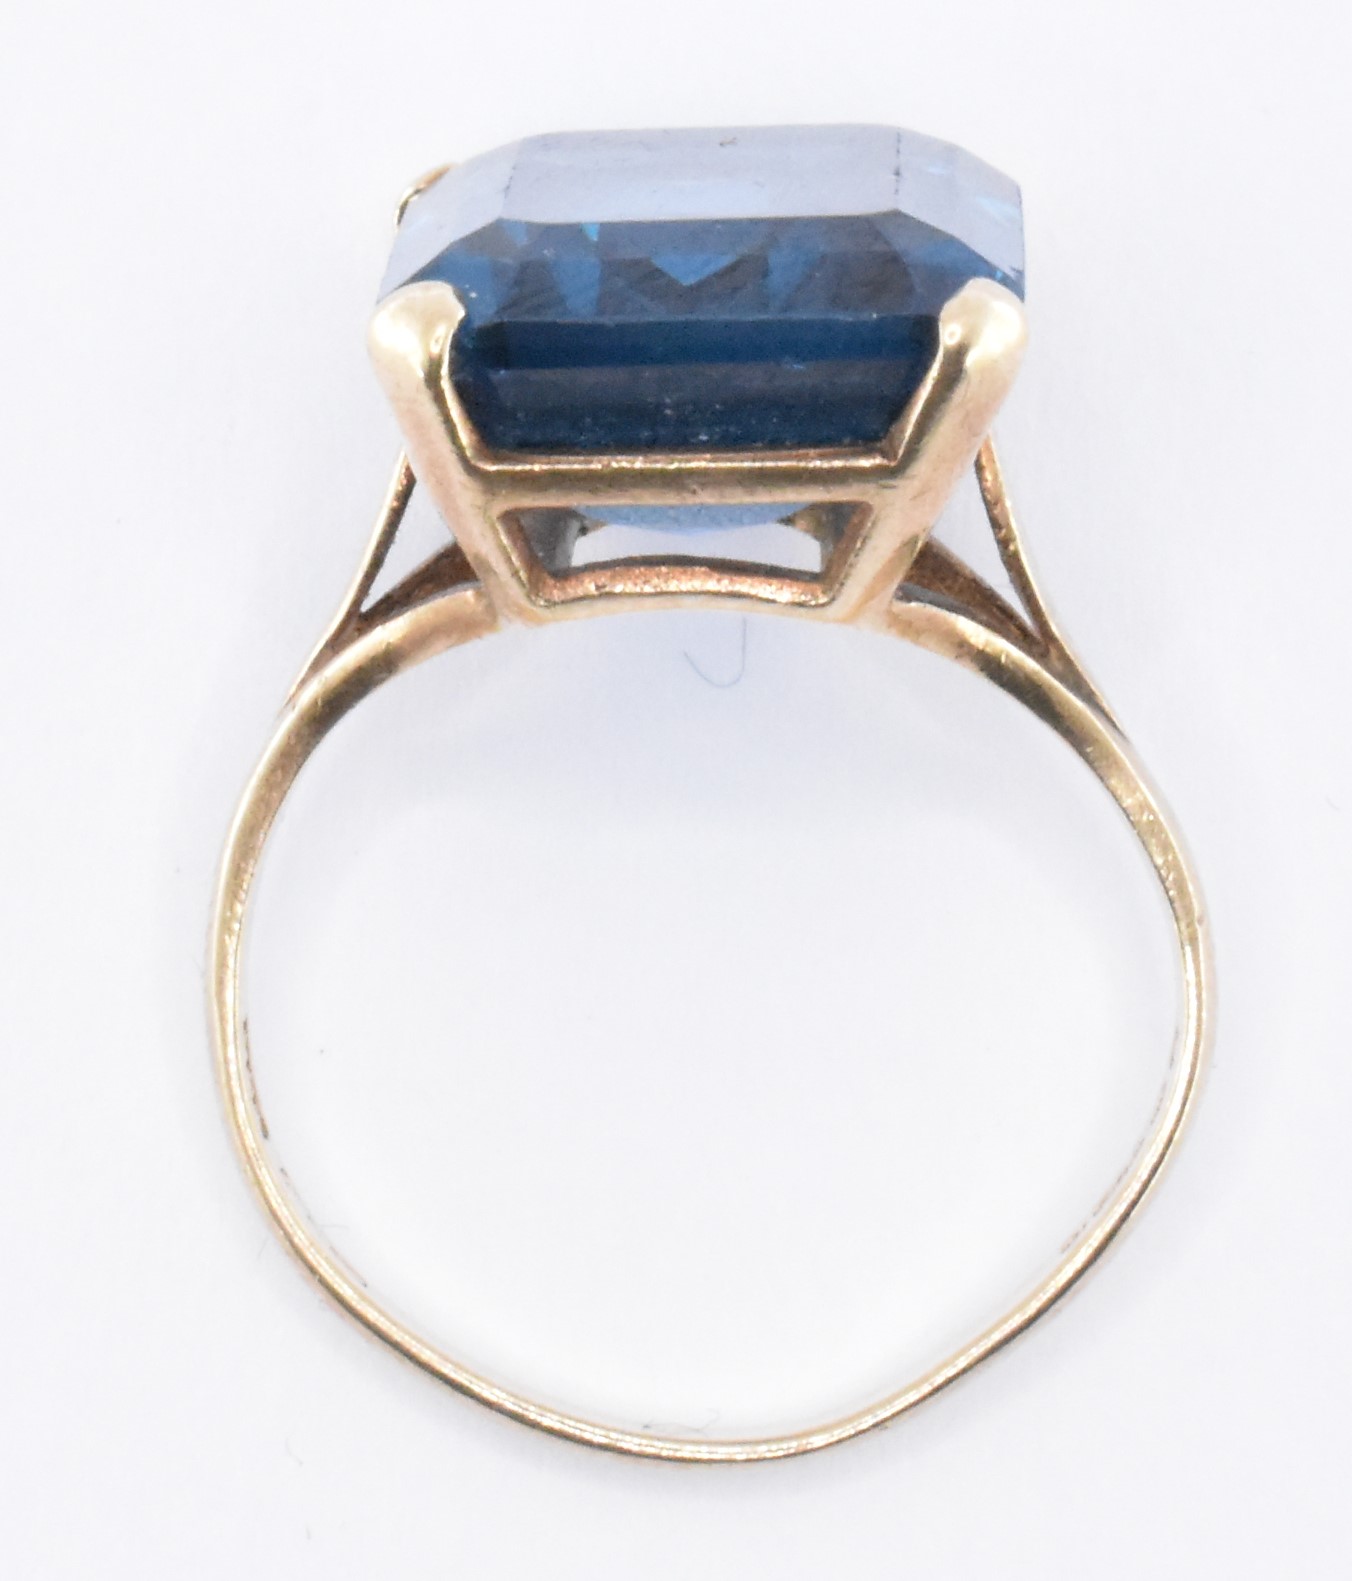 HALLMARKED 9CT GOLD & SYNTHETIC SPINEL DRESS RING - Image 6 of 6